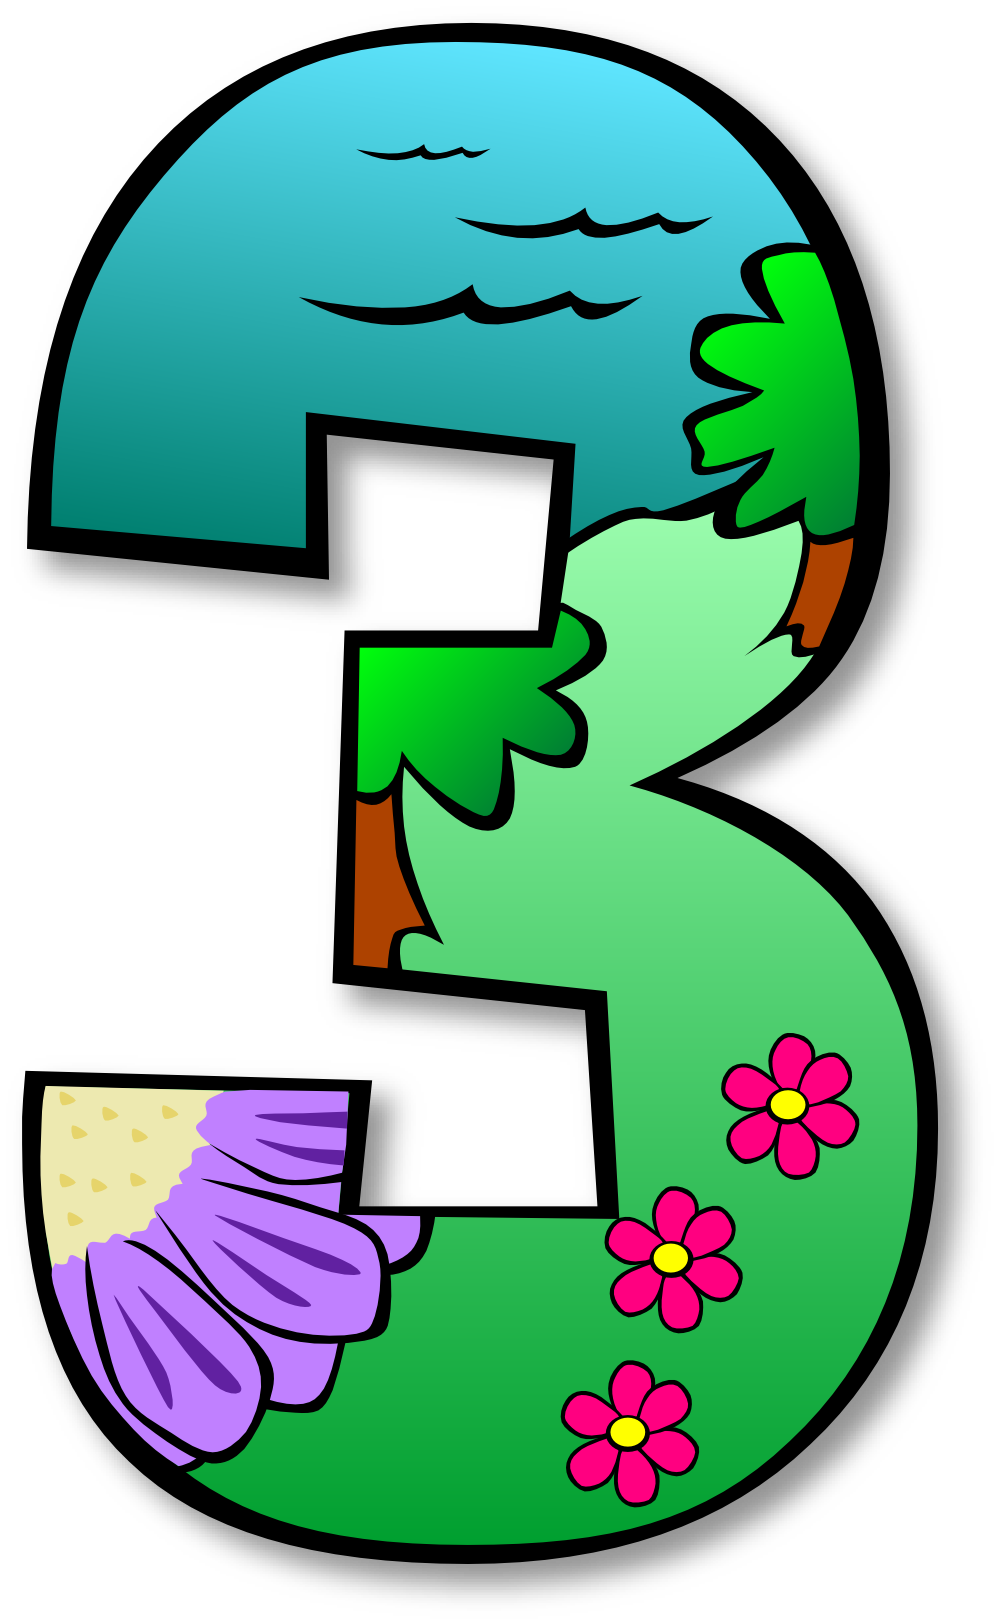 Number 2 Clipart | Clipart Panda - Free Clipart Images